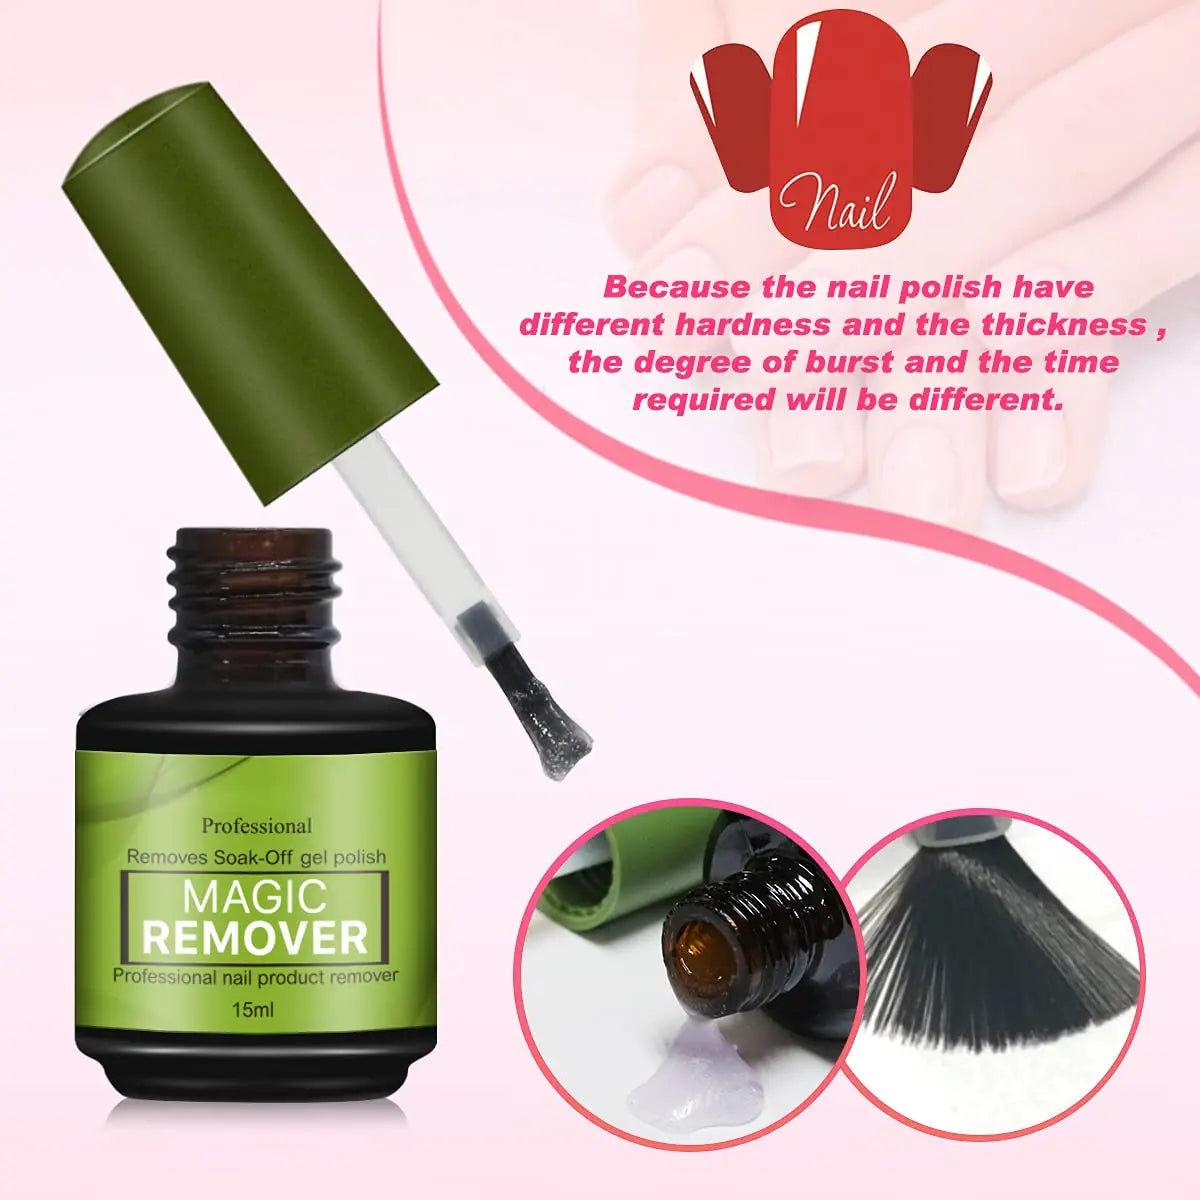 Gel nail polish remover that is quick and easy in 3-5 min